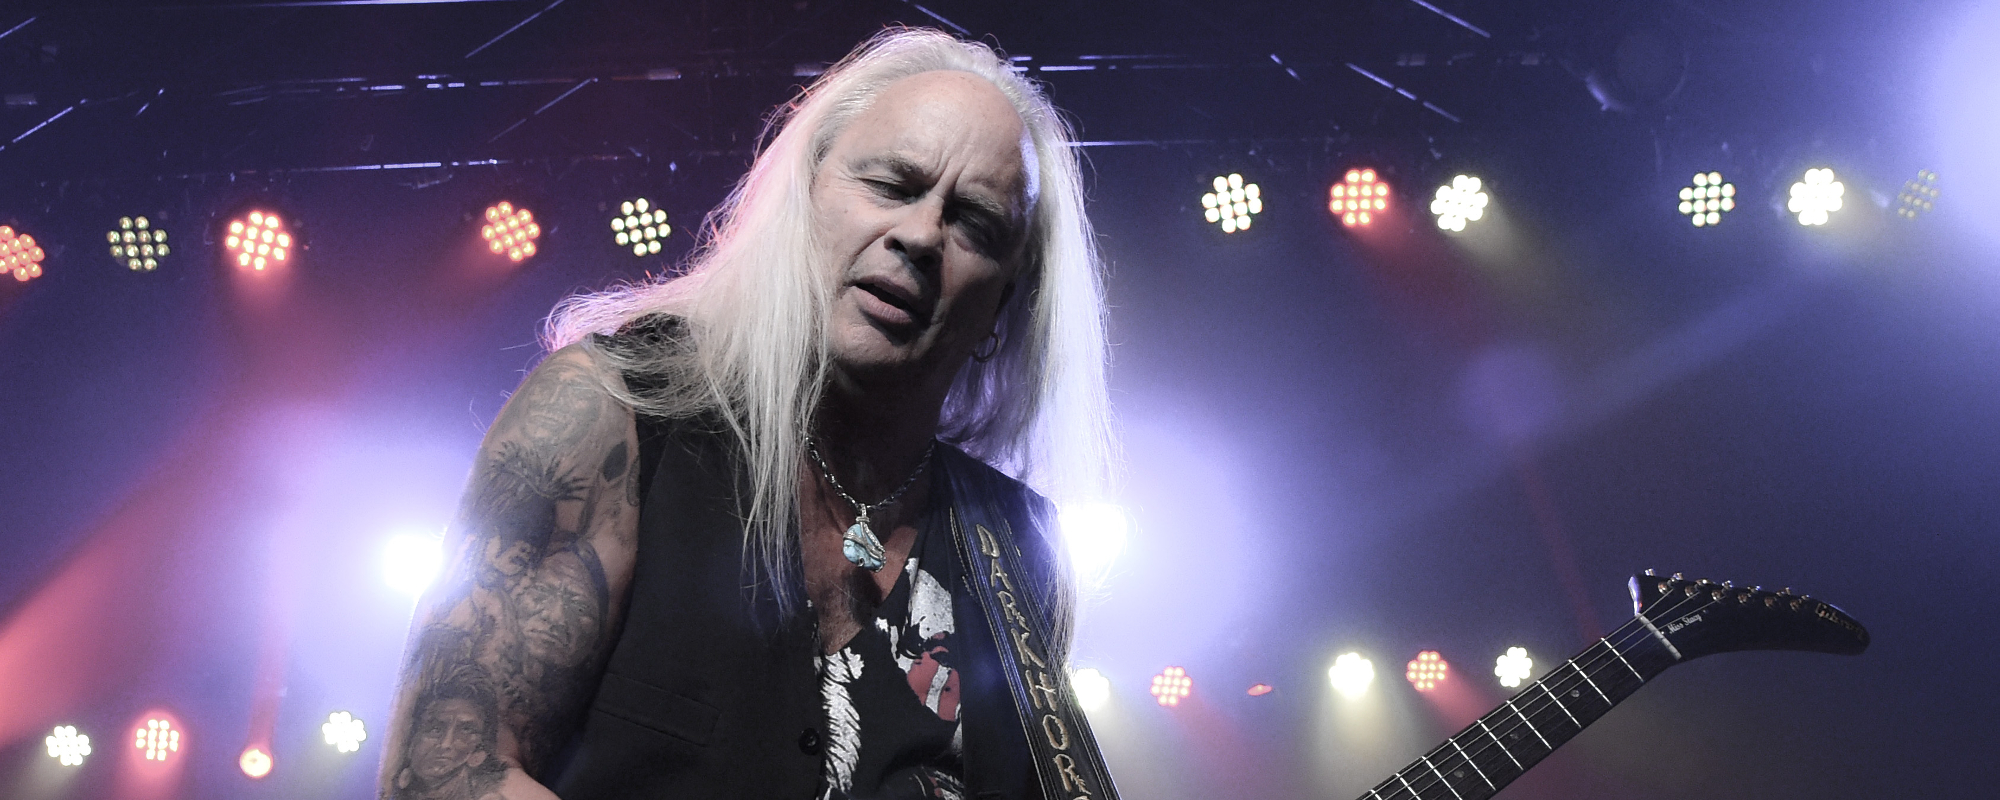 Lynyrd Skynyrd’s Rickey Medlocke Reveals Promise He Made to the Late Gary Rossington Ahead of New Year’s Eve Performance